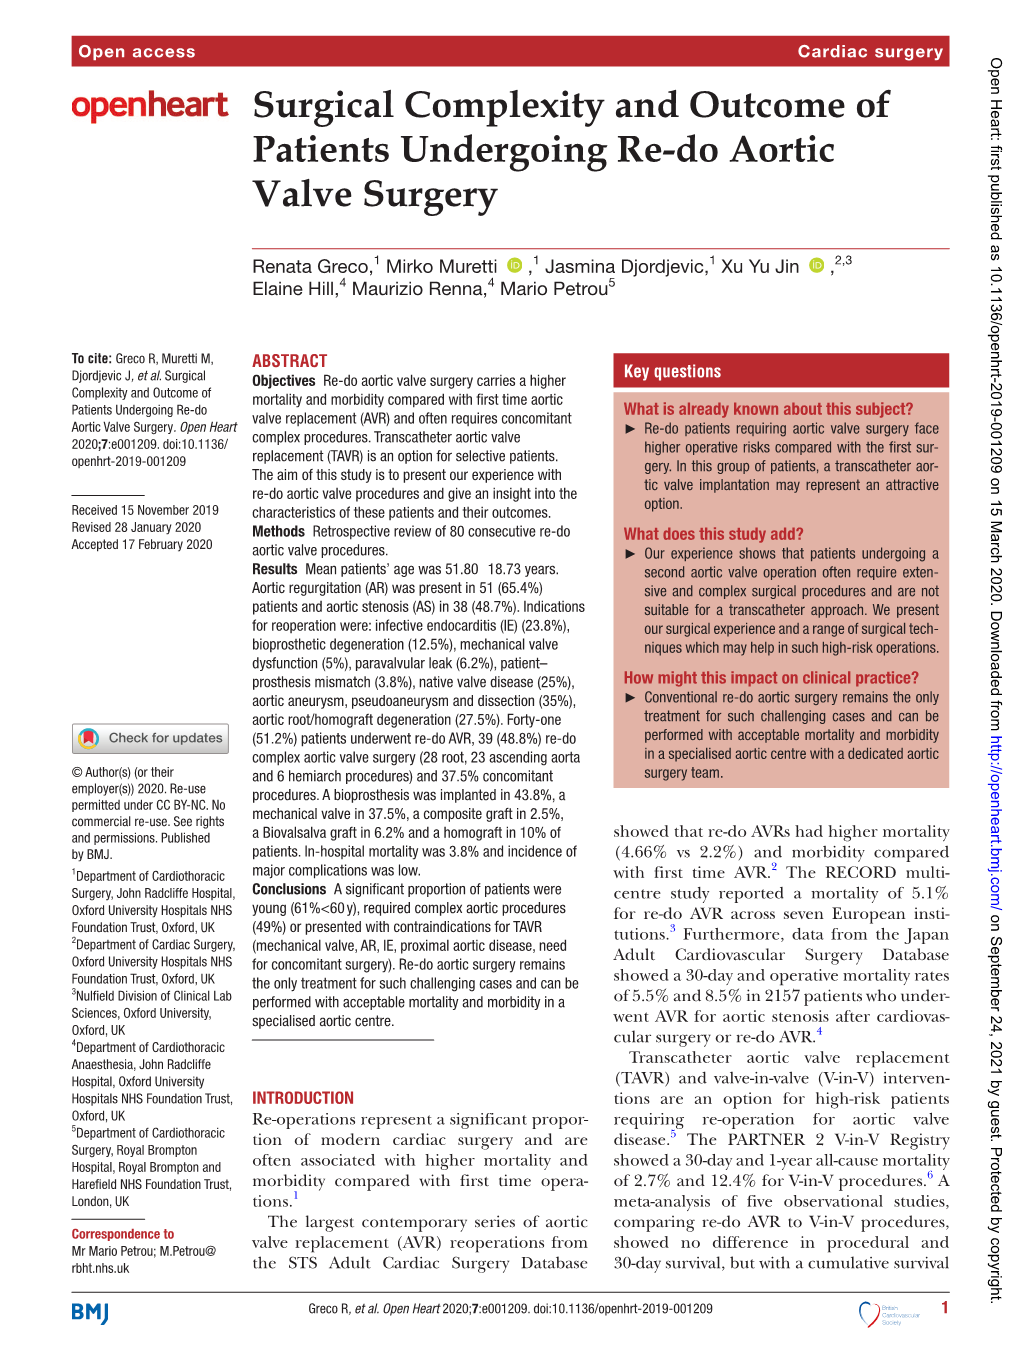 Surgical Complexity and Outcome of Patients Undergoing Re-Do Aortic